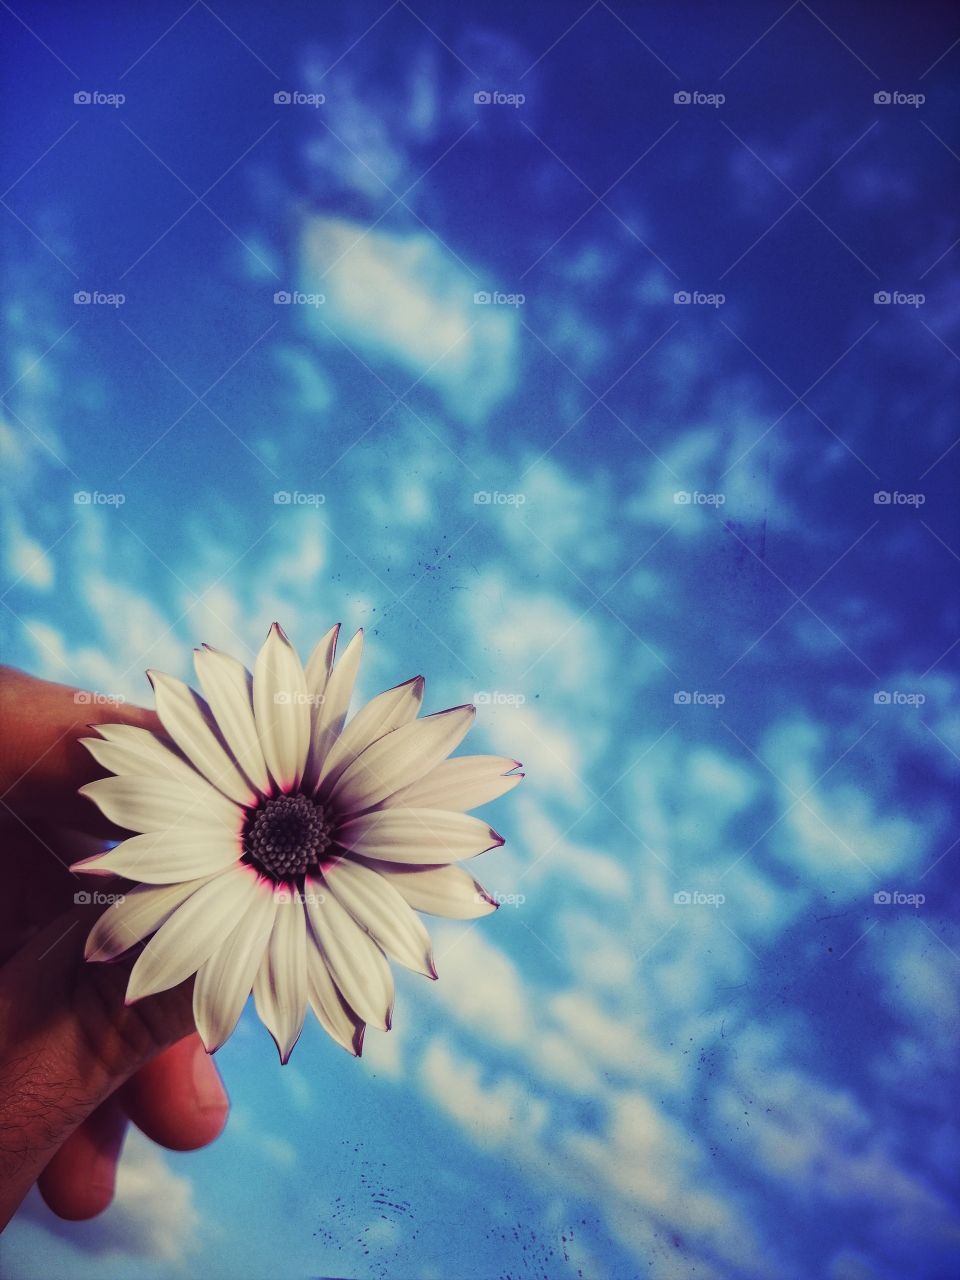 Flower and sky.